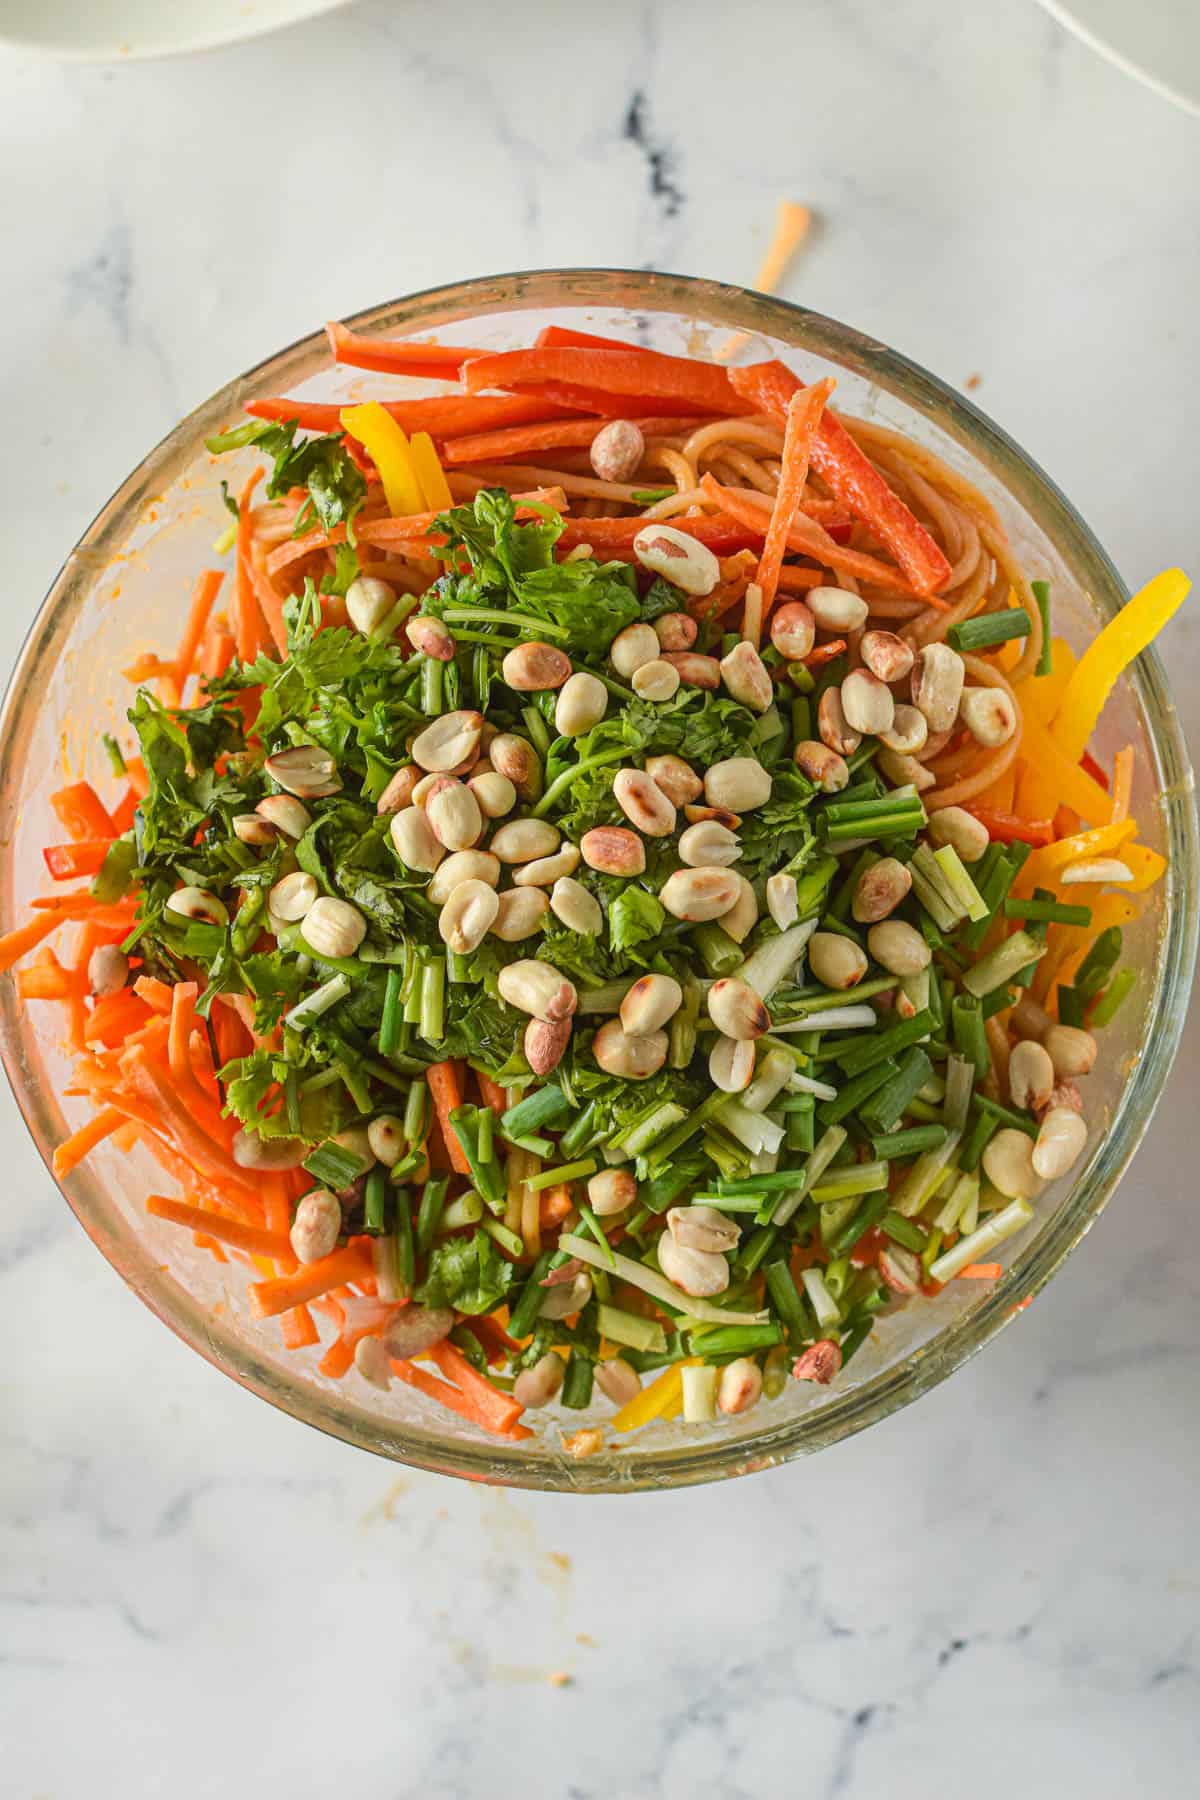 Adding chopped peanuts and green onions to a large bowl with vegetables and cooked pasta.